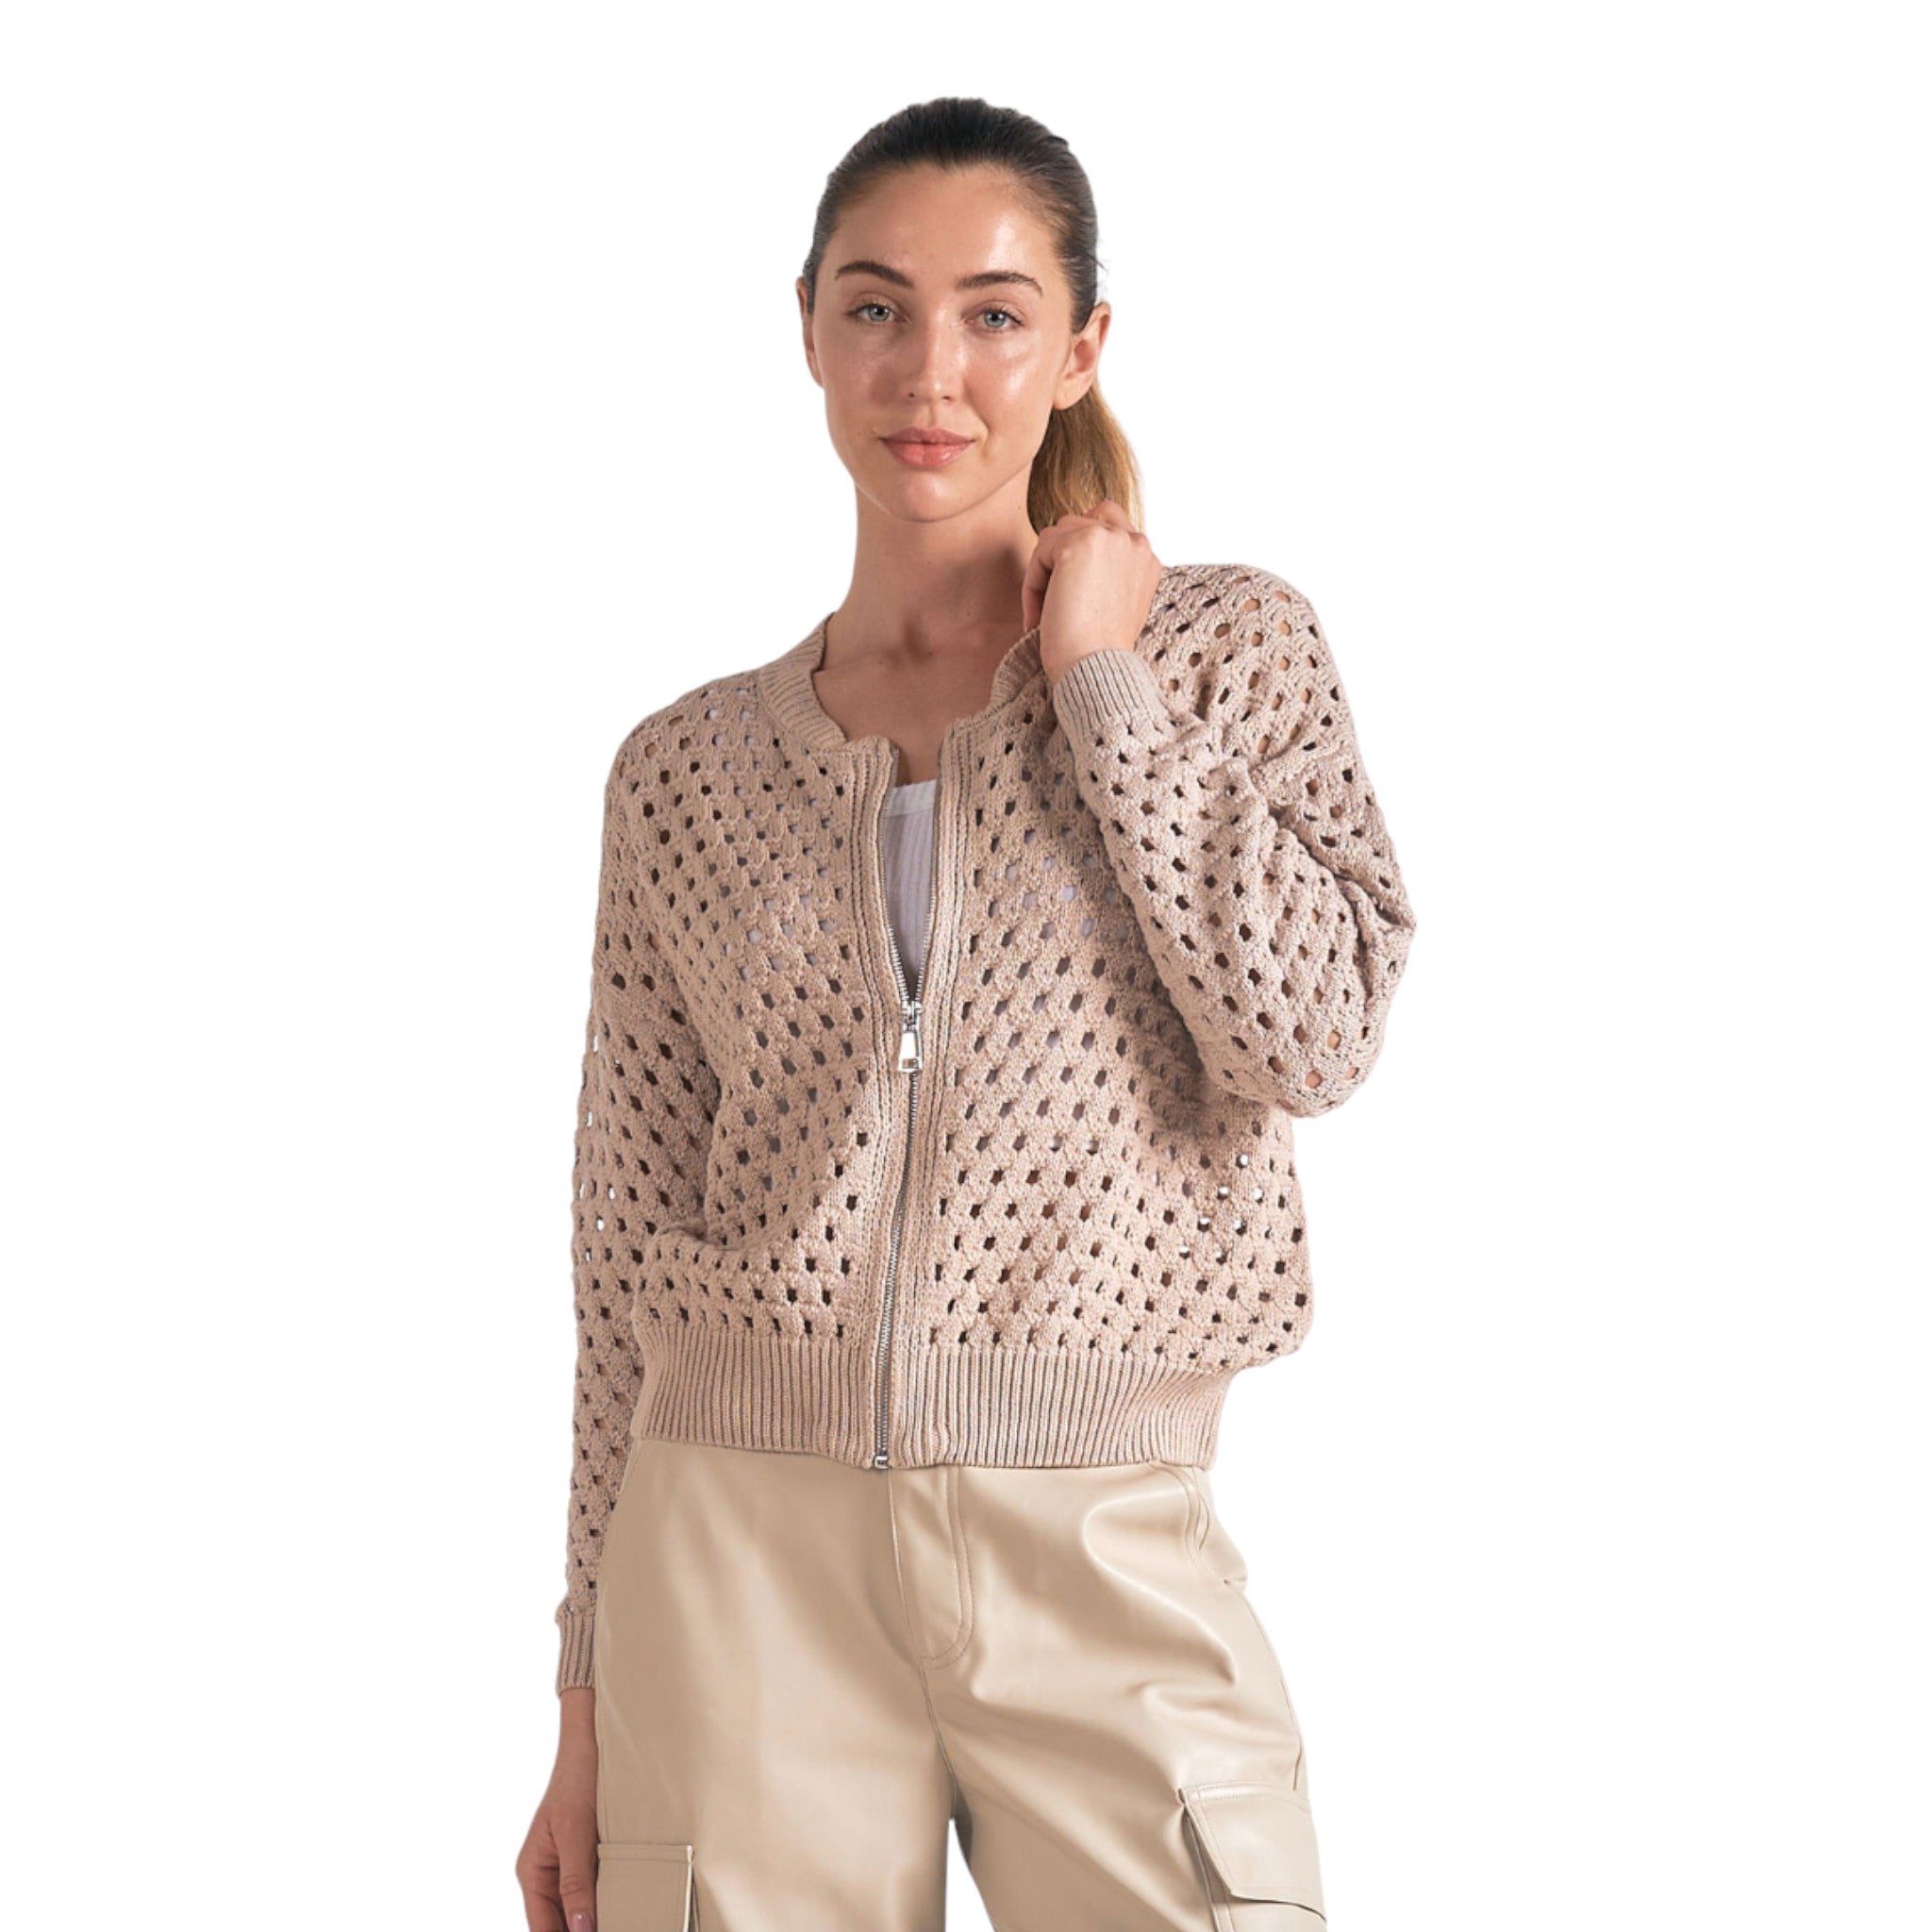 beige colored open knit bomber jacket with silver zipper.